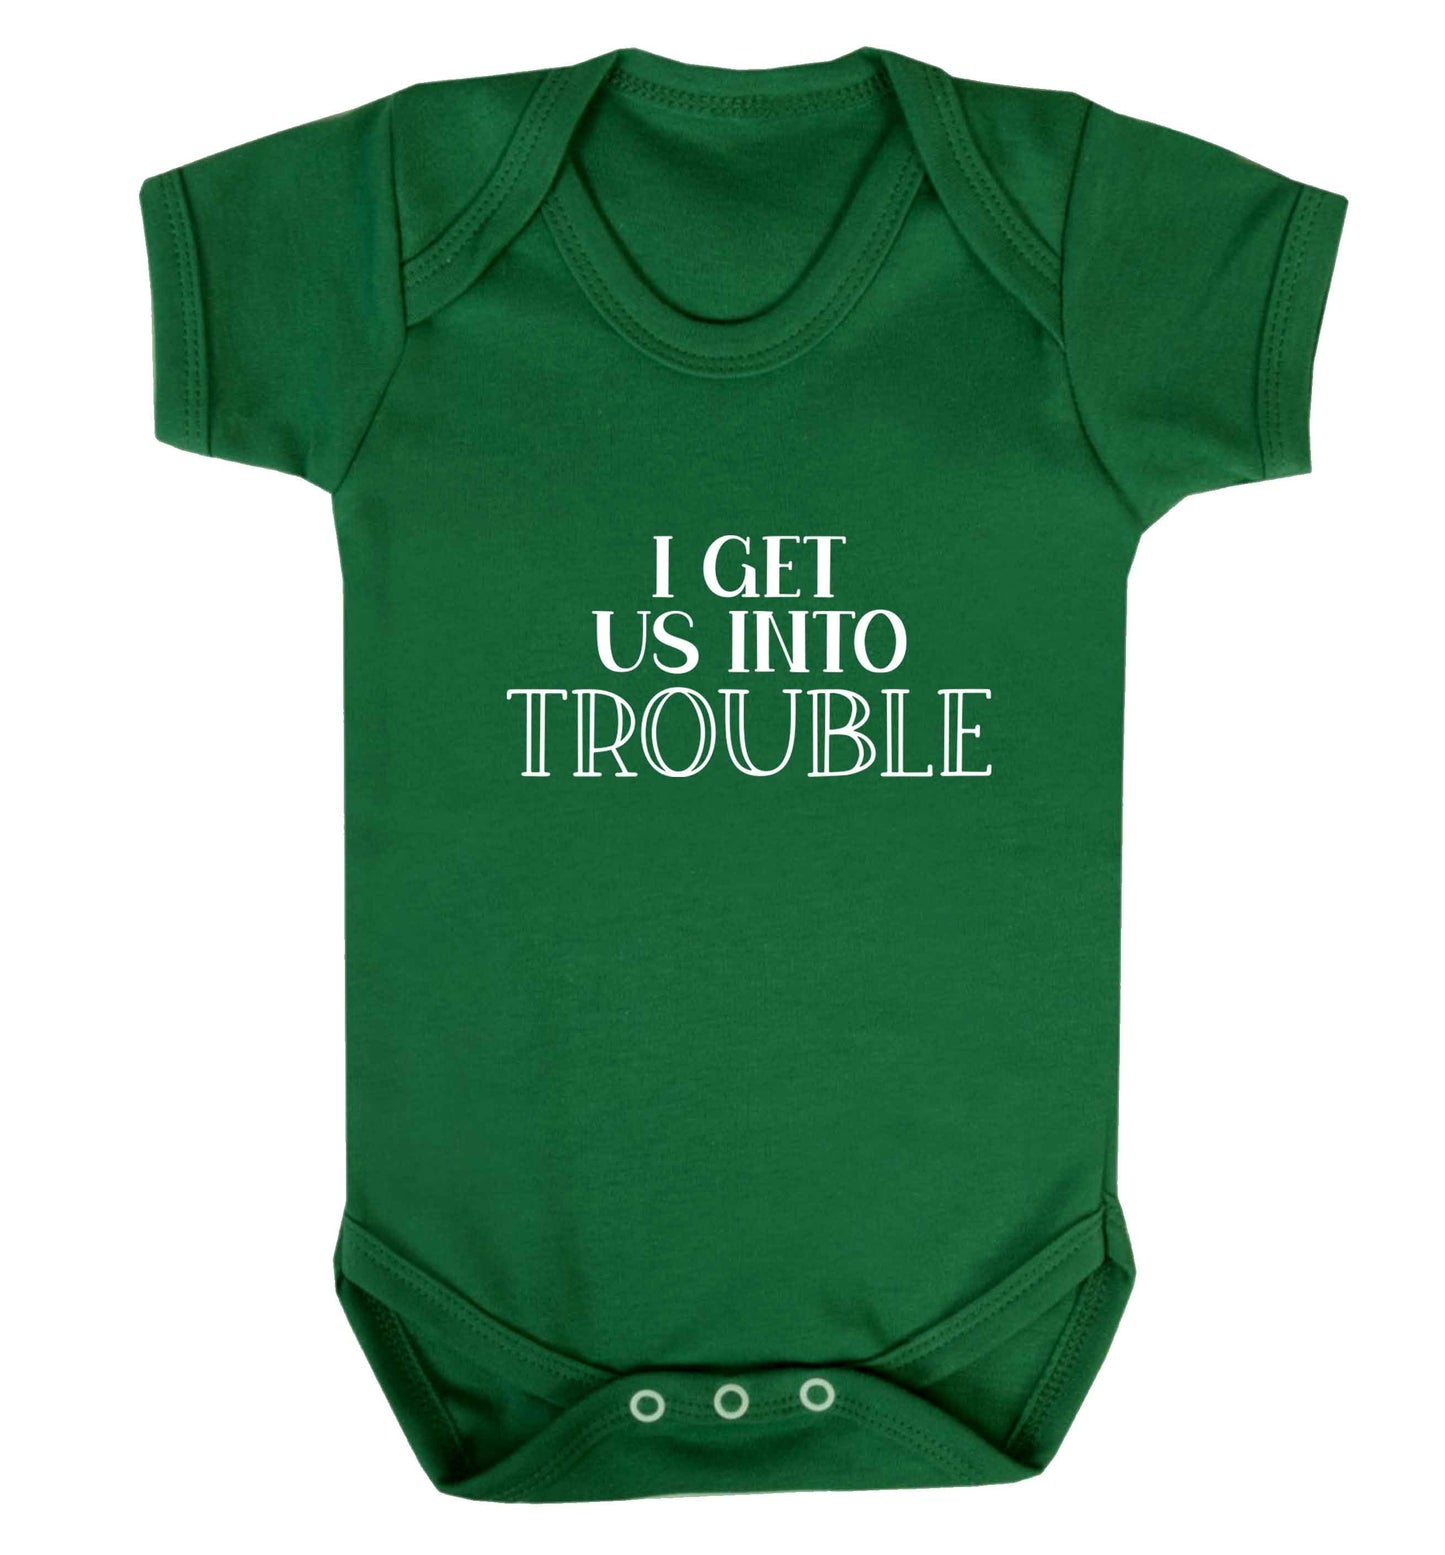 I get us into trouble baby vest green 18-24 months